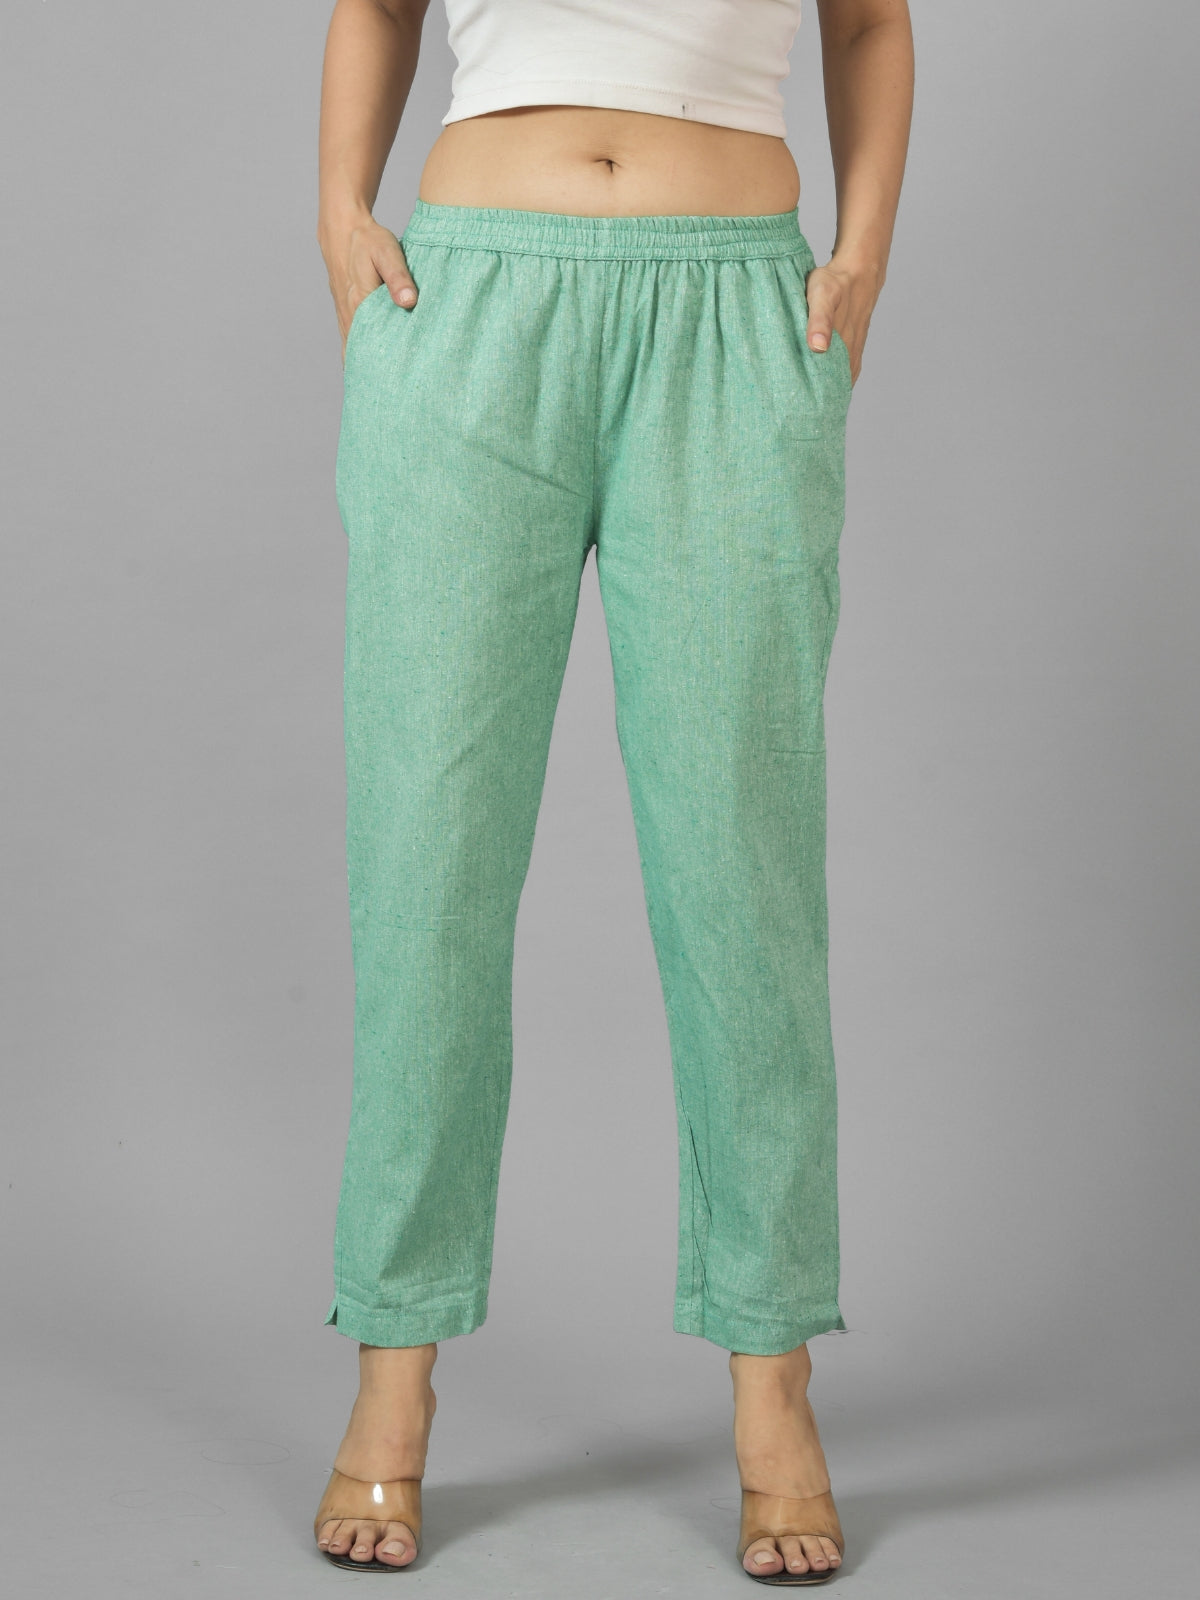 Pack Of 2 Womens Denim Blue and Green Fully Elastic Cotton Trousers